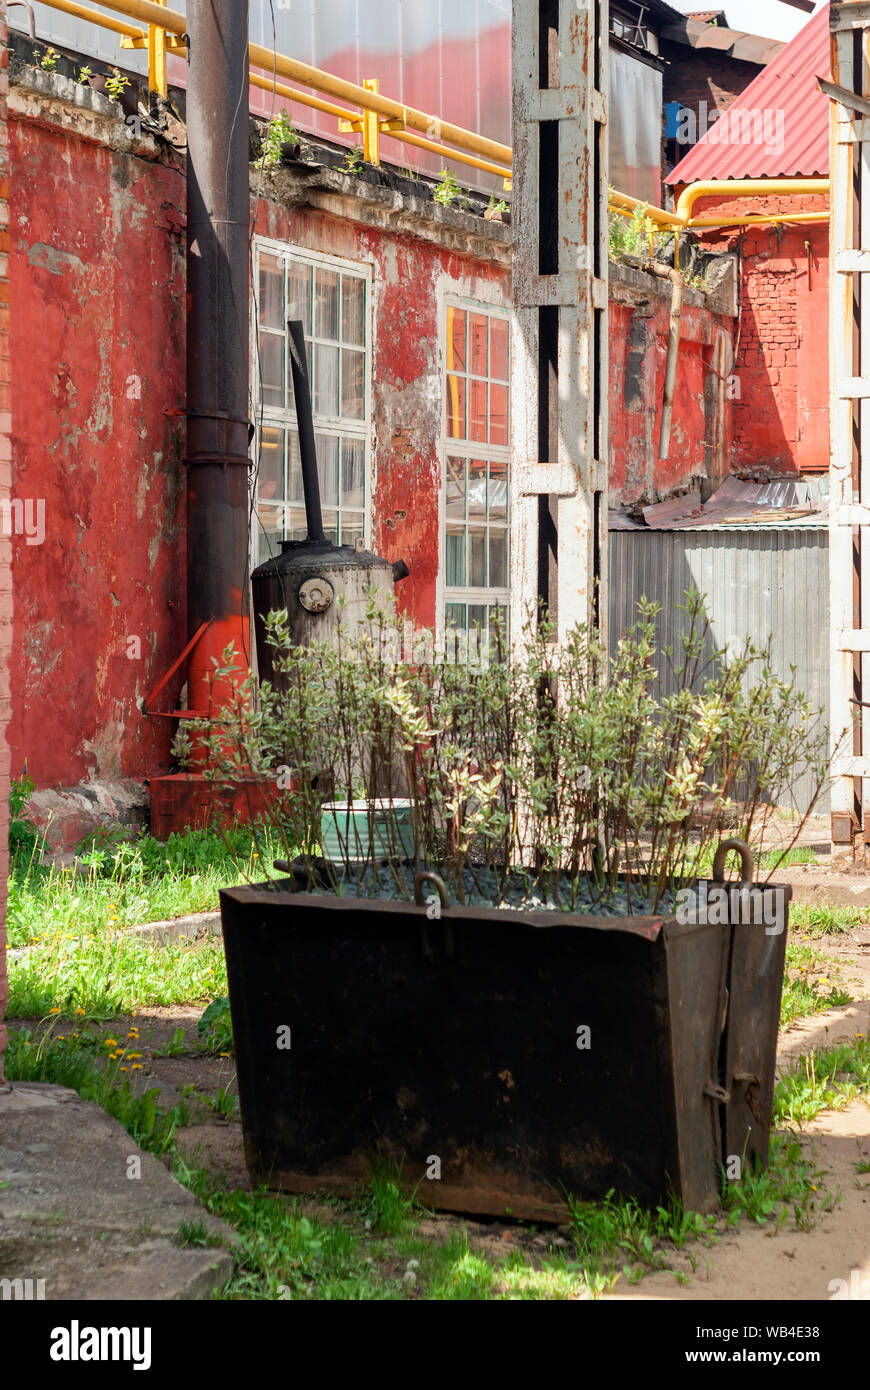 backyard of workshop of an old factory with ornamental vegetation in a clamshell bucket from a retired coal-loading crane Stock Photo